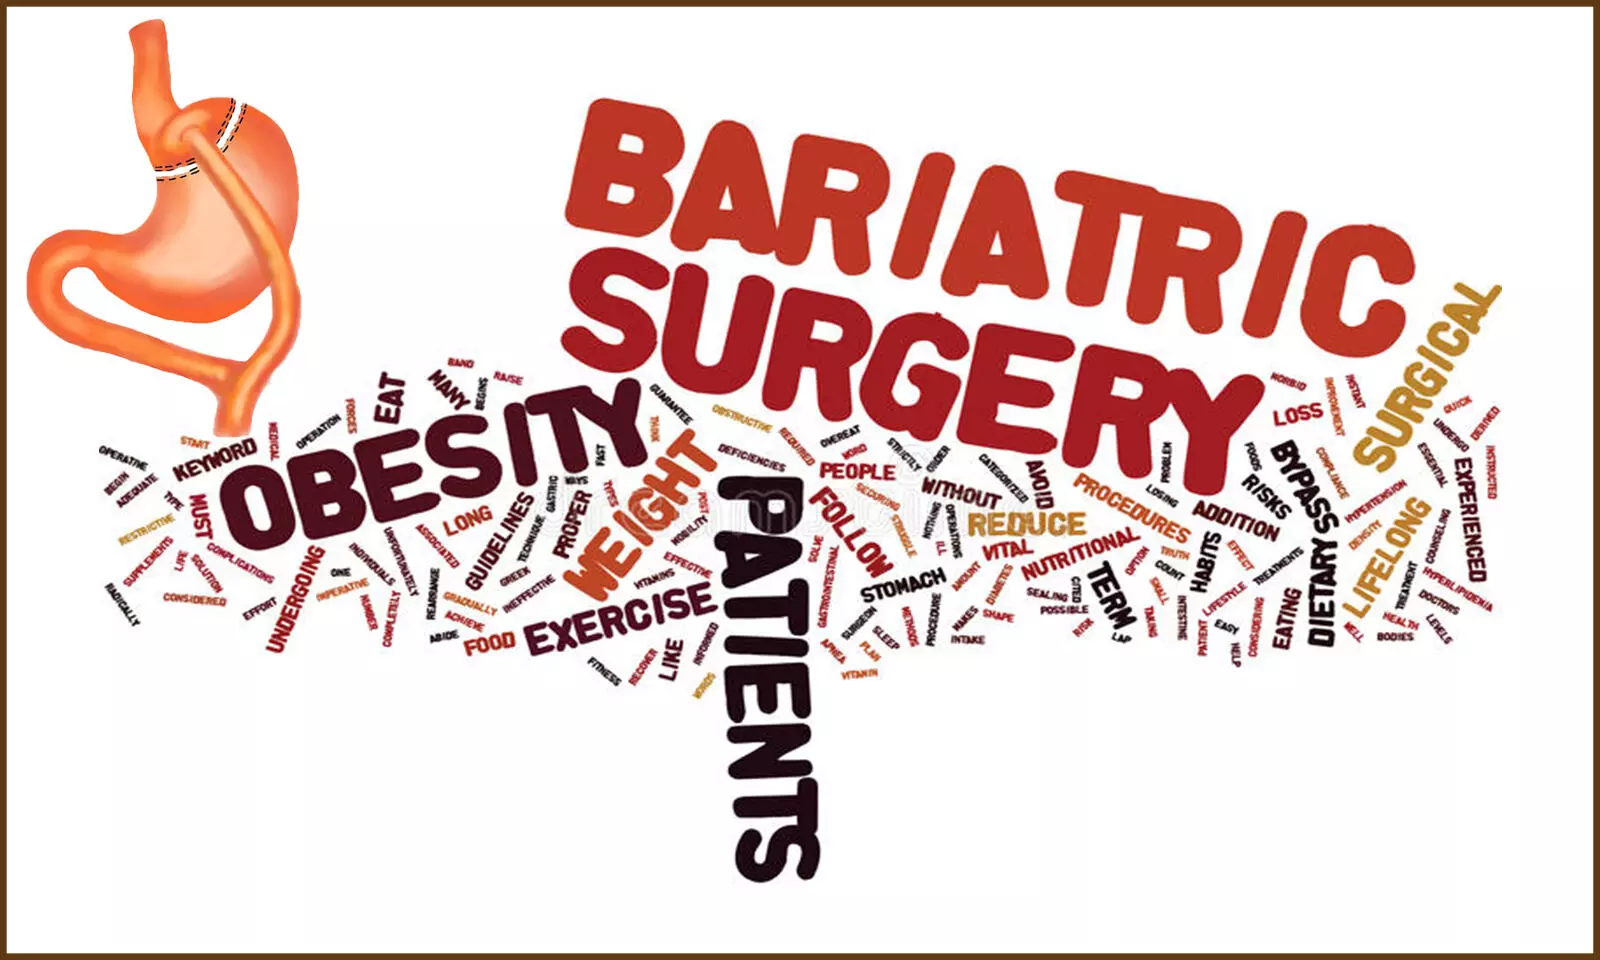 Adequate weight loss by bariatric surgery may help improve albuminuria in severe obesity